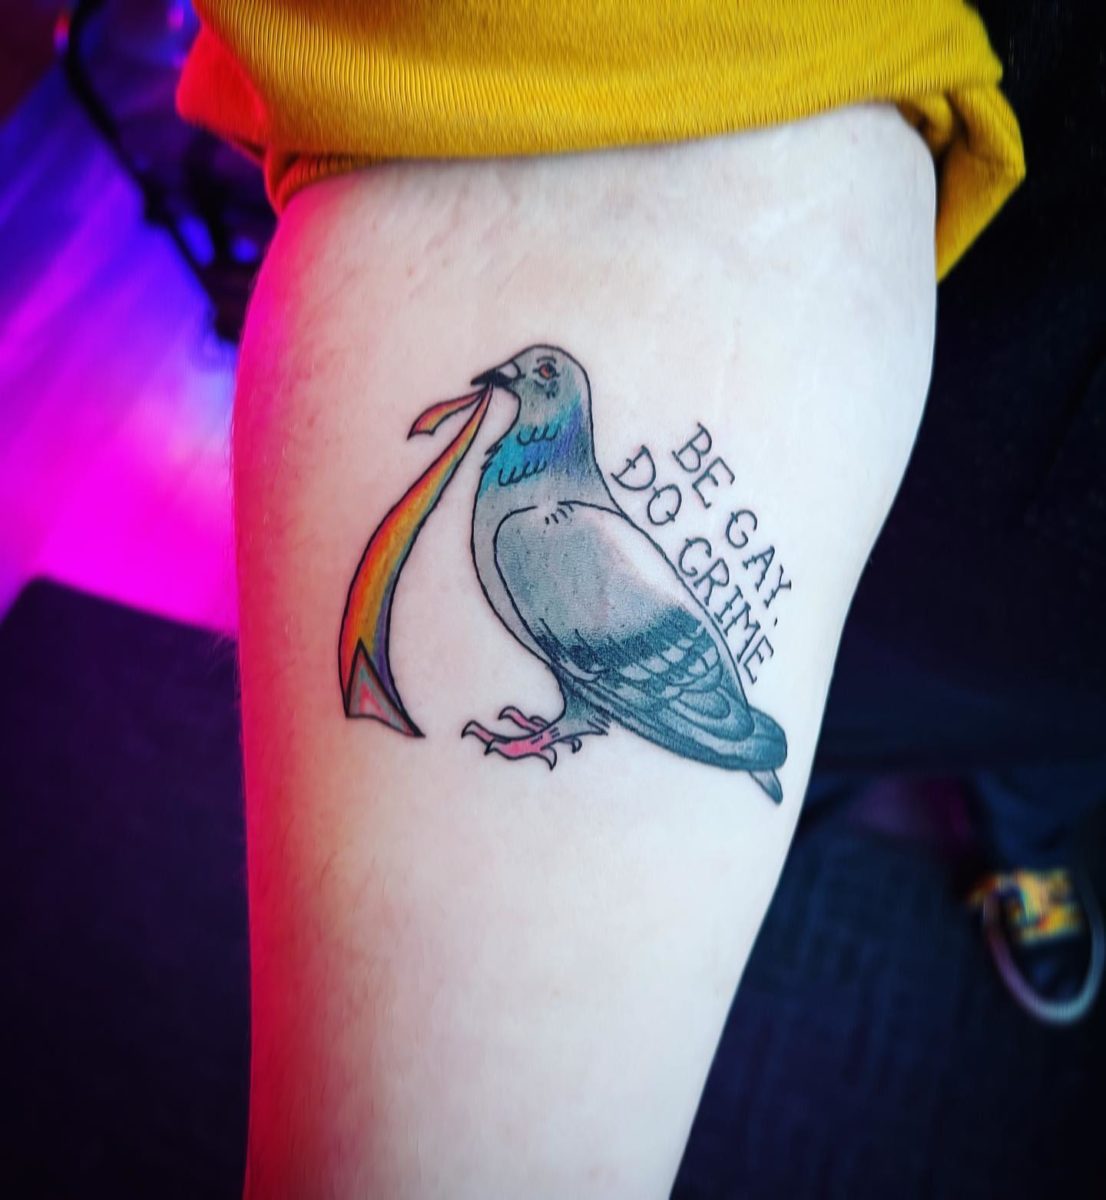 loud and proud lgbt tattoo ideas | show your pride with an lgbt tattoo that celebrates love.